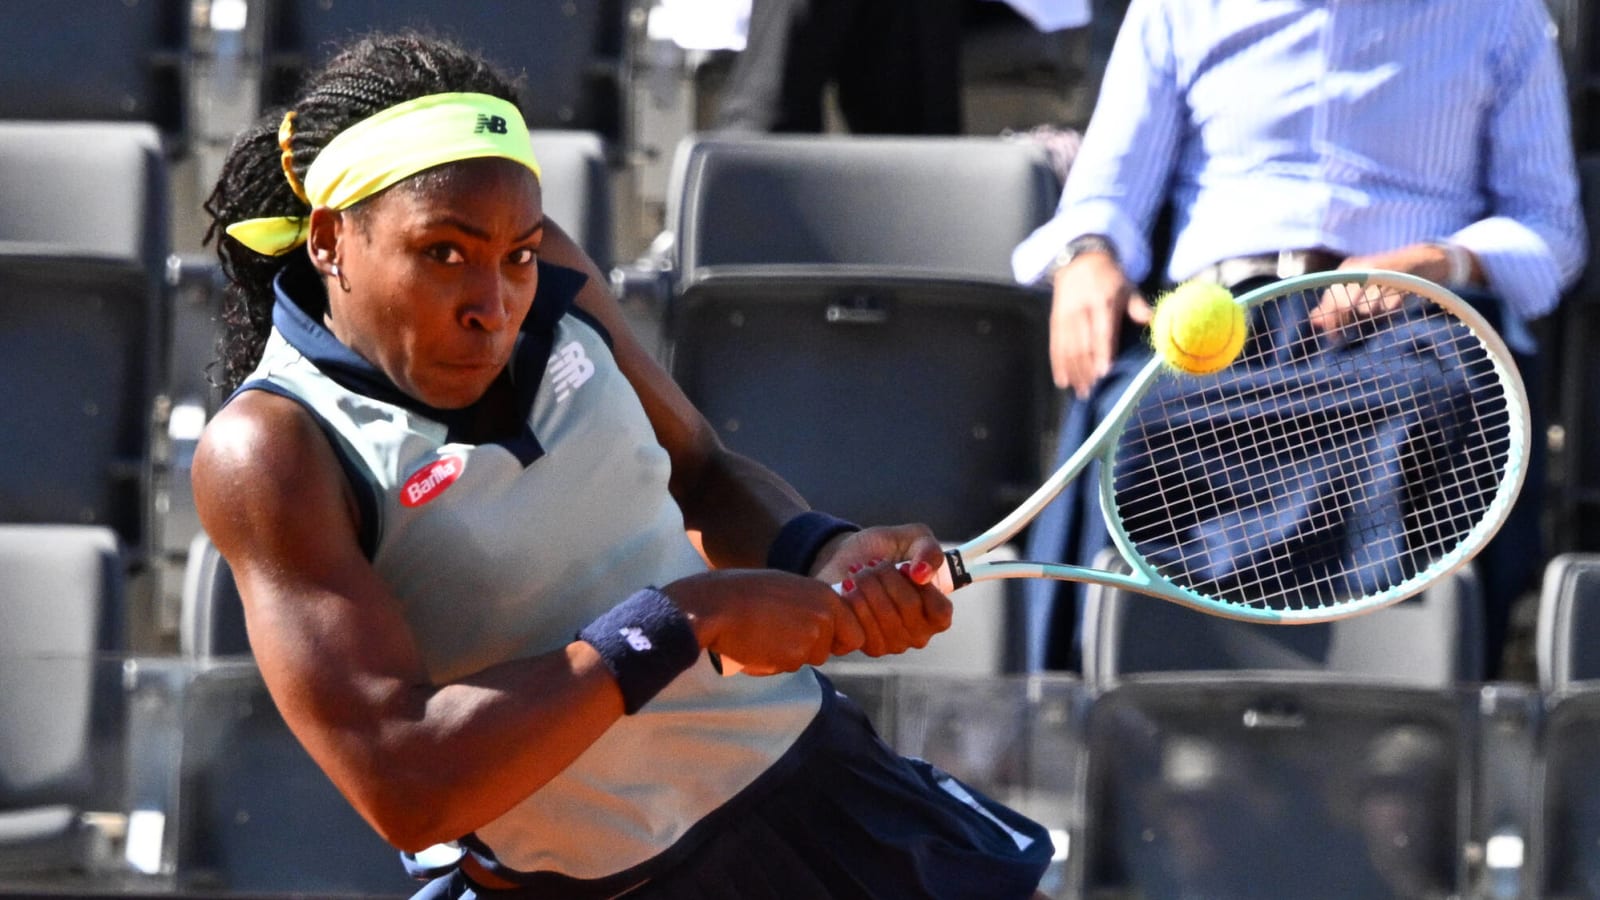 'I feel more negative emotions right now,' Coco Gauff claims she would’ve defeated any other player besides Iga Swiatek in Italian Open semifinals